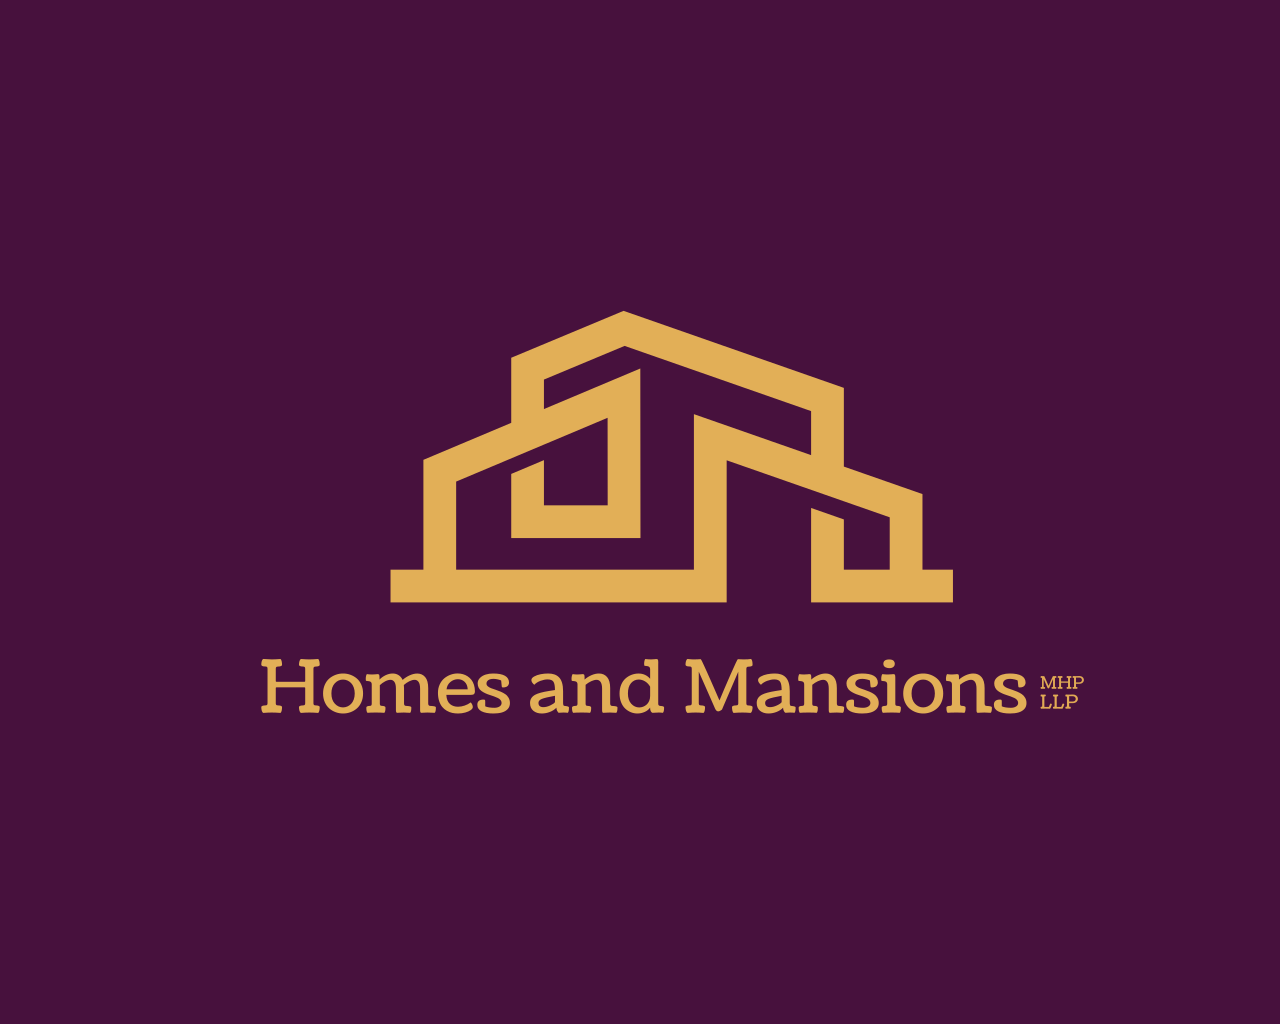 Homes and Mansions MHP LLP